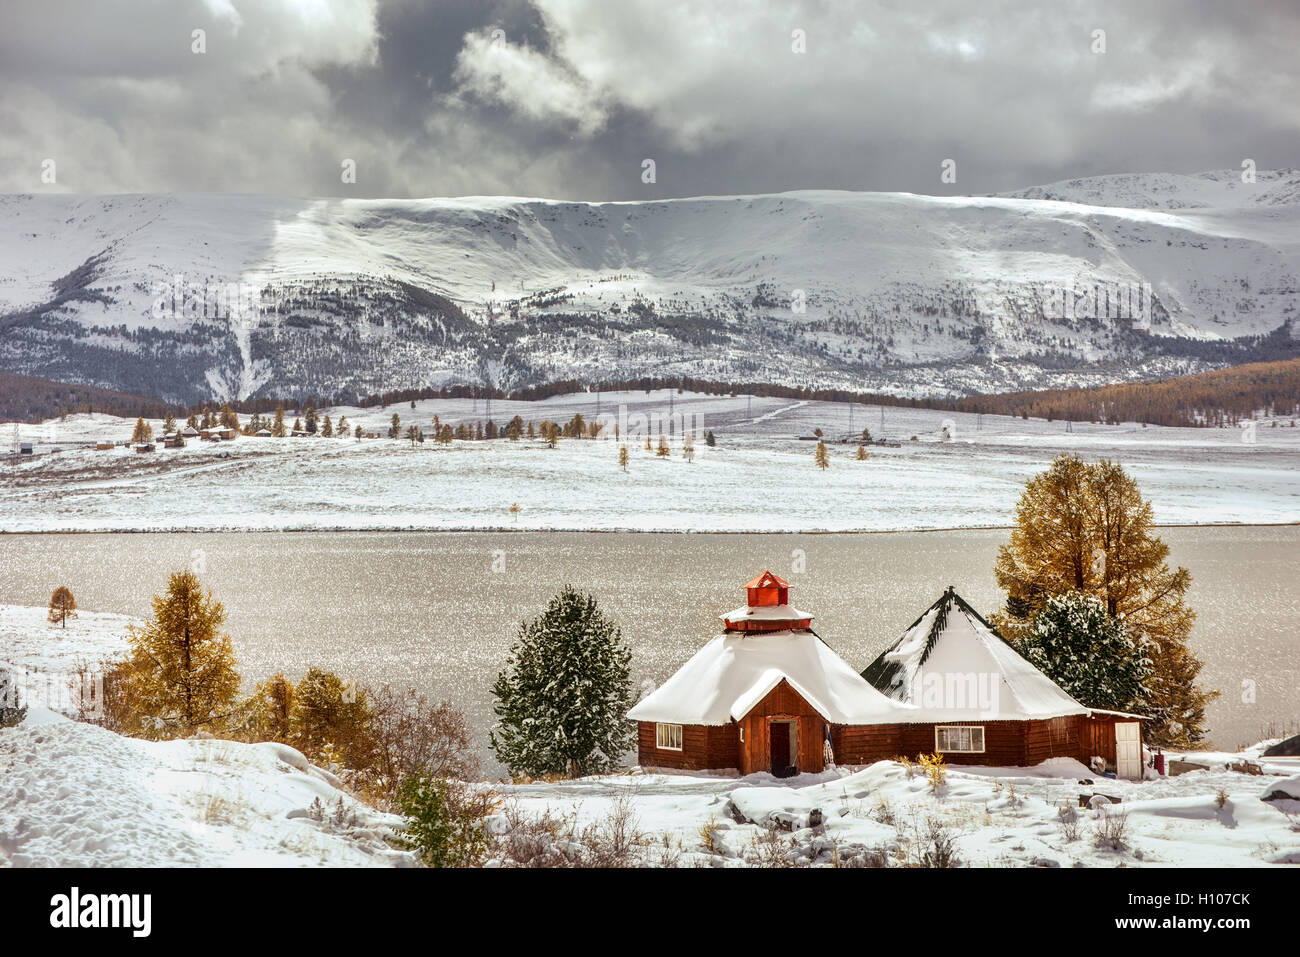 Little house on the snowy mountains background Stock Photo